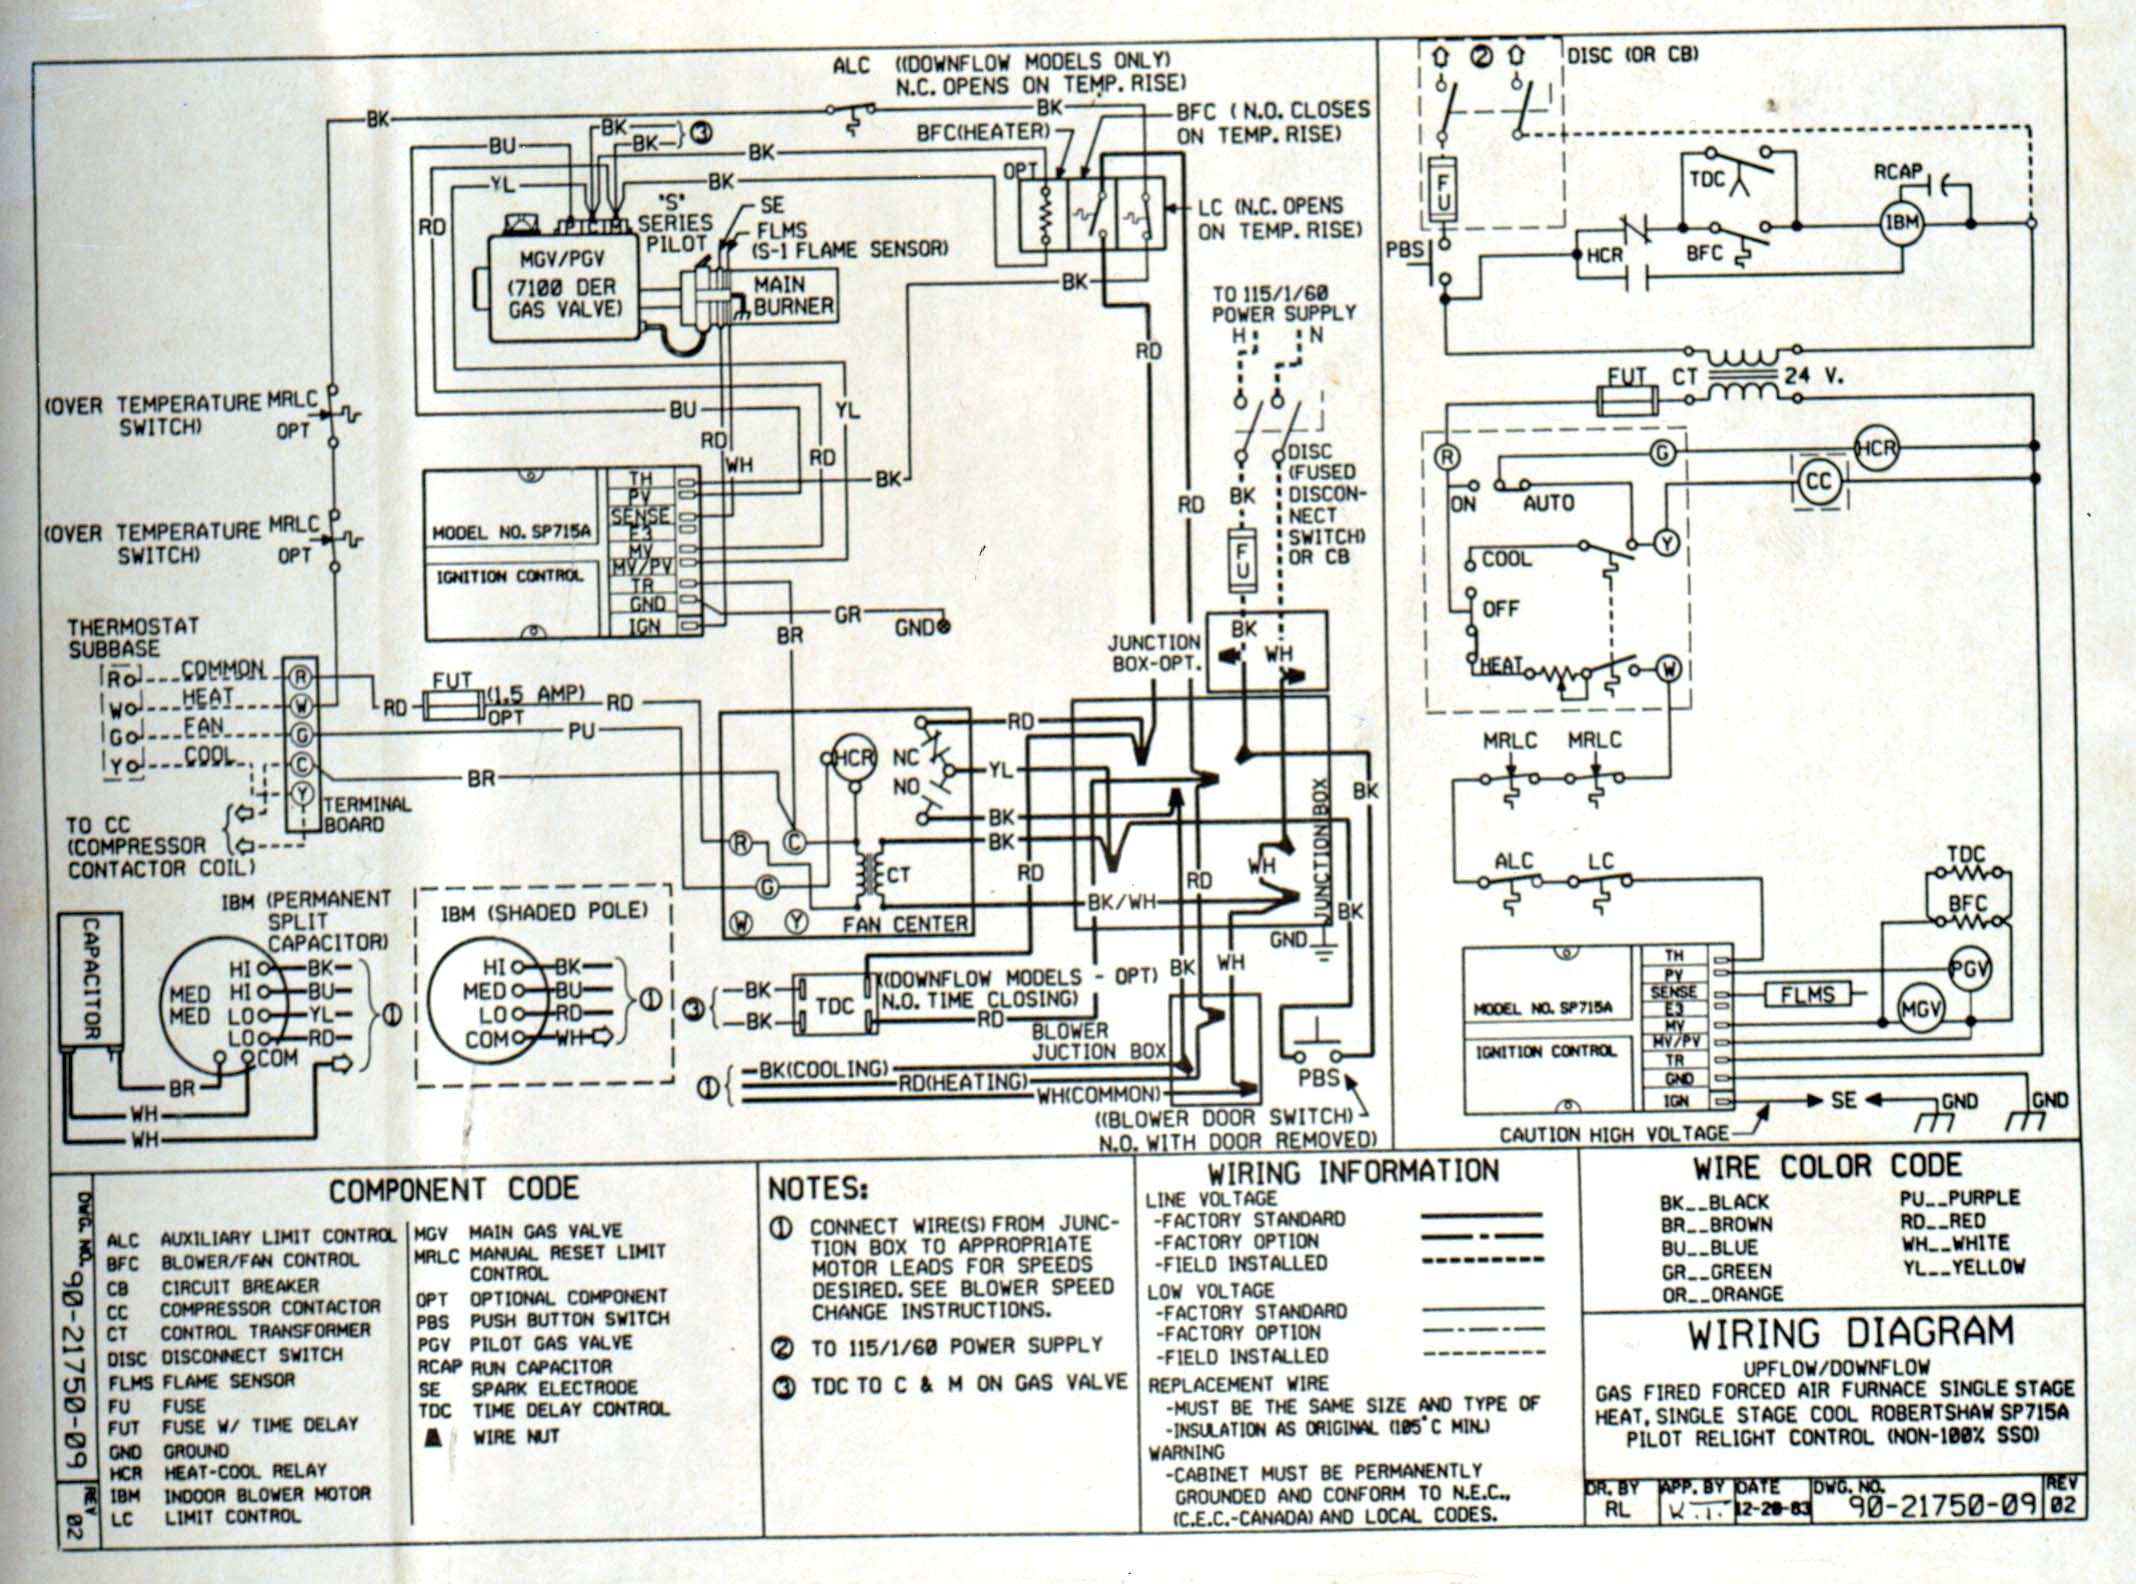 Carrier Furnace Wiring Diagram New Wiring Diagrams for Gas Furnace Valid Refrence Wiring Diagram for